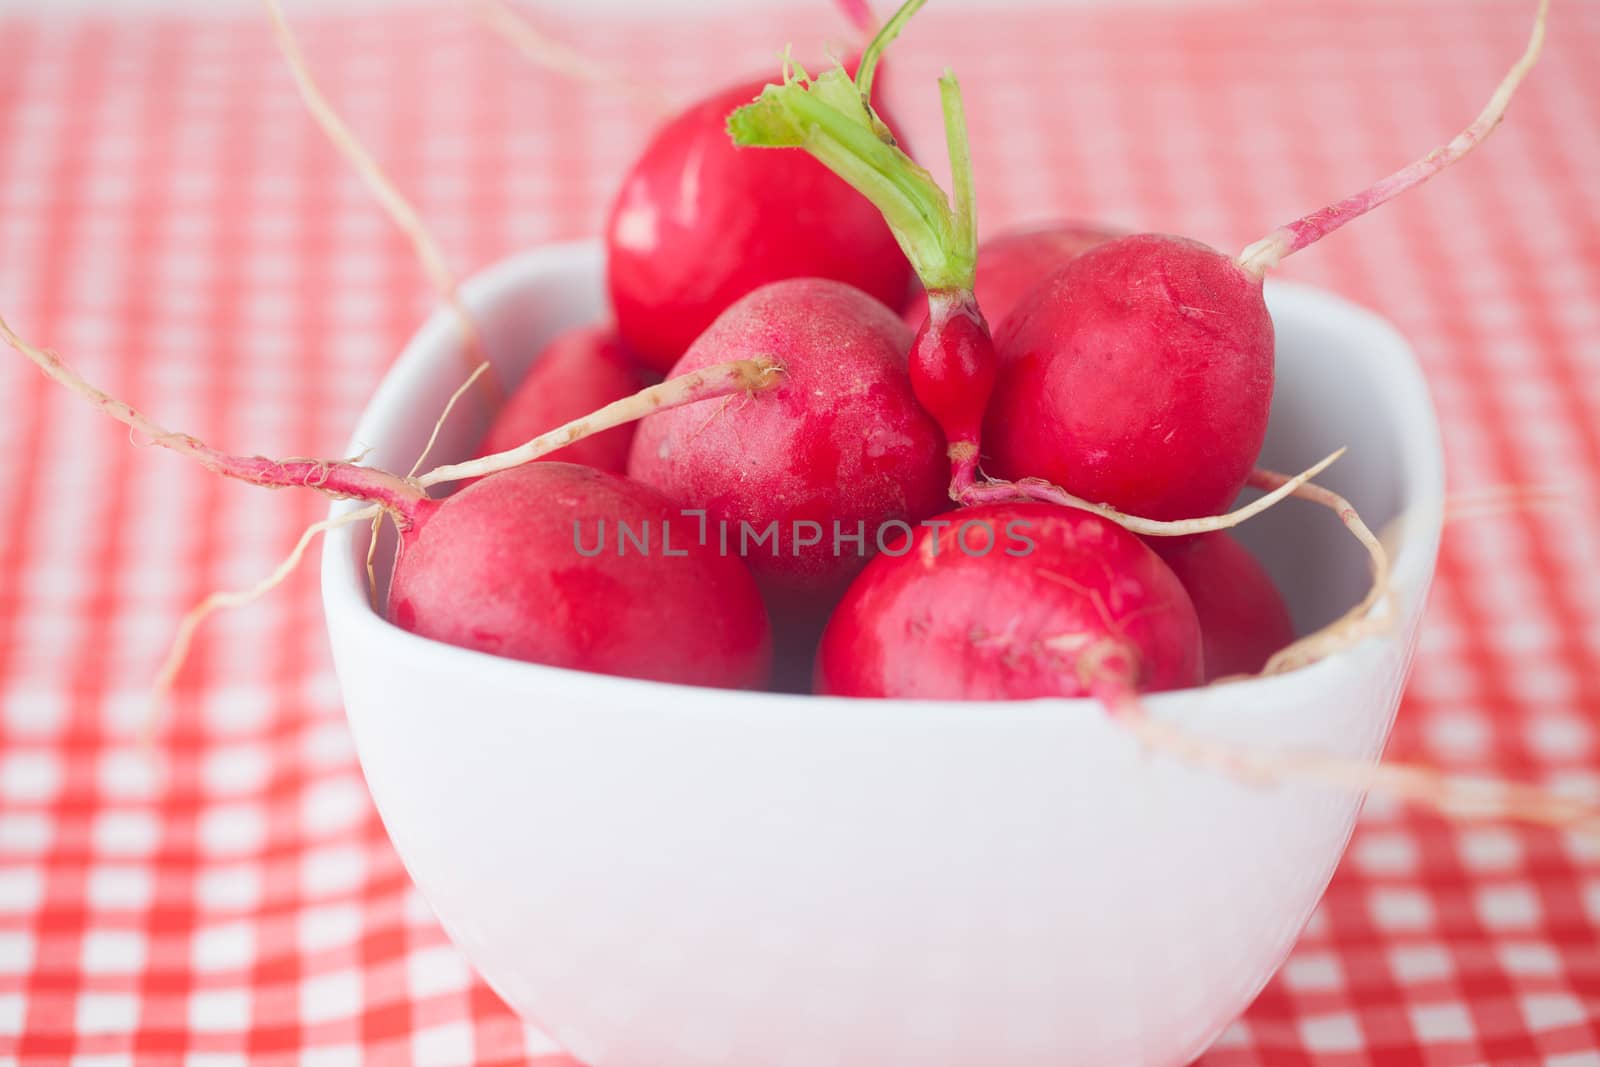 radish in bowl on checkered fabric by jannyjus